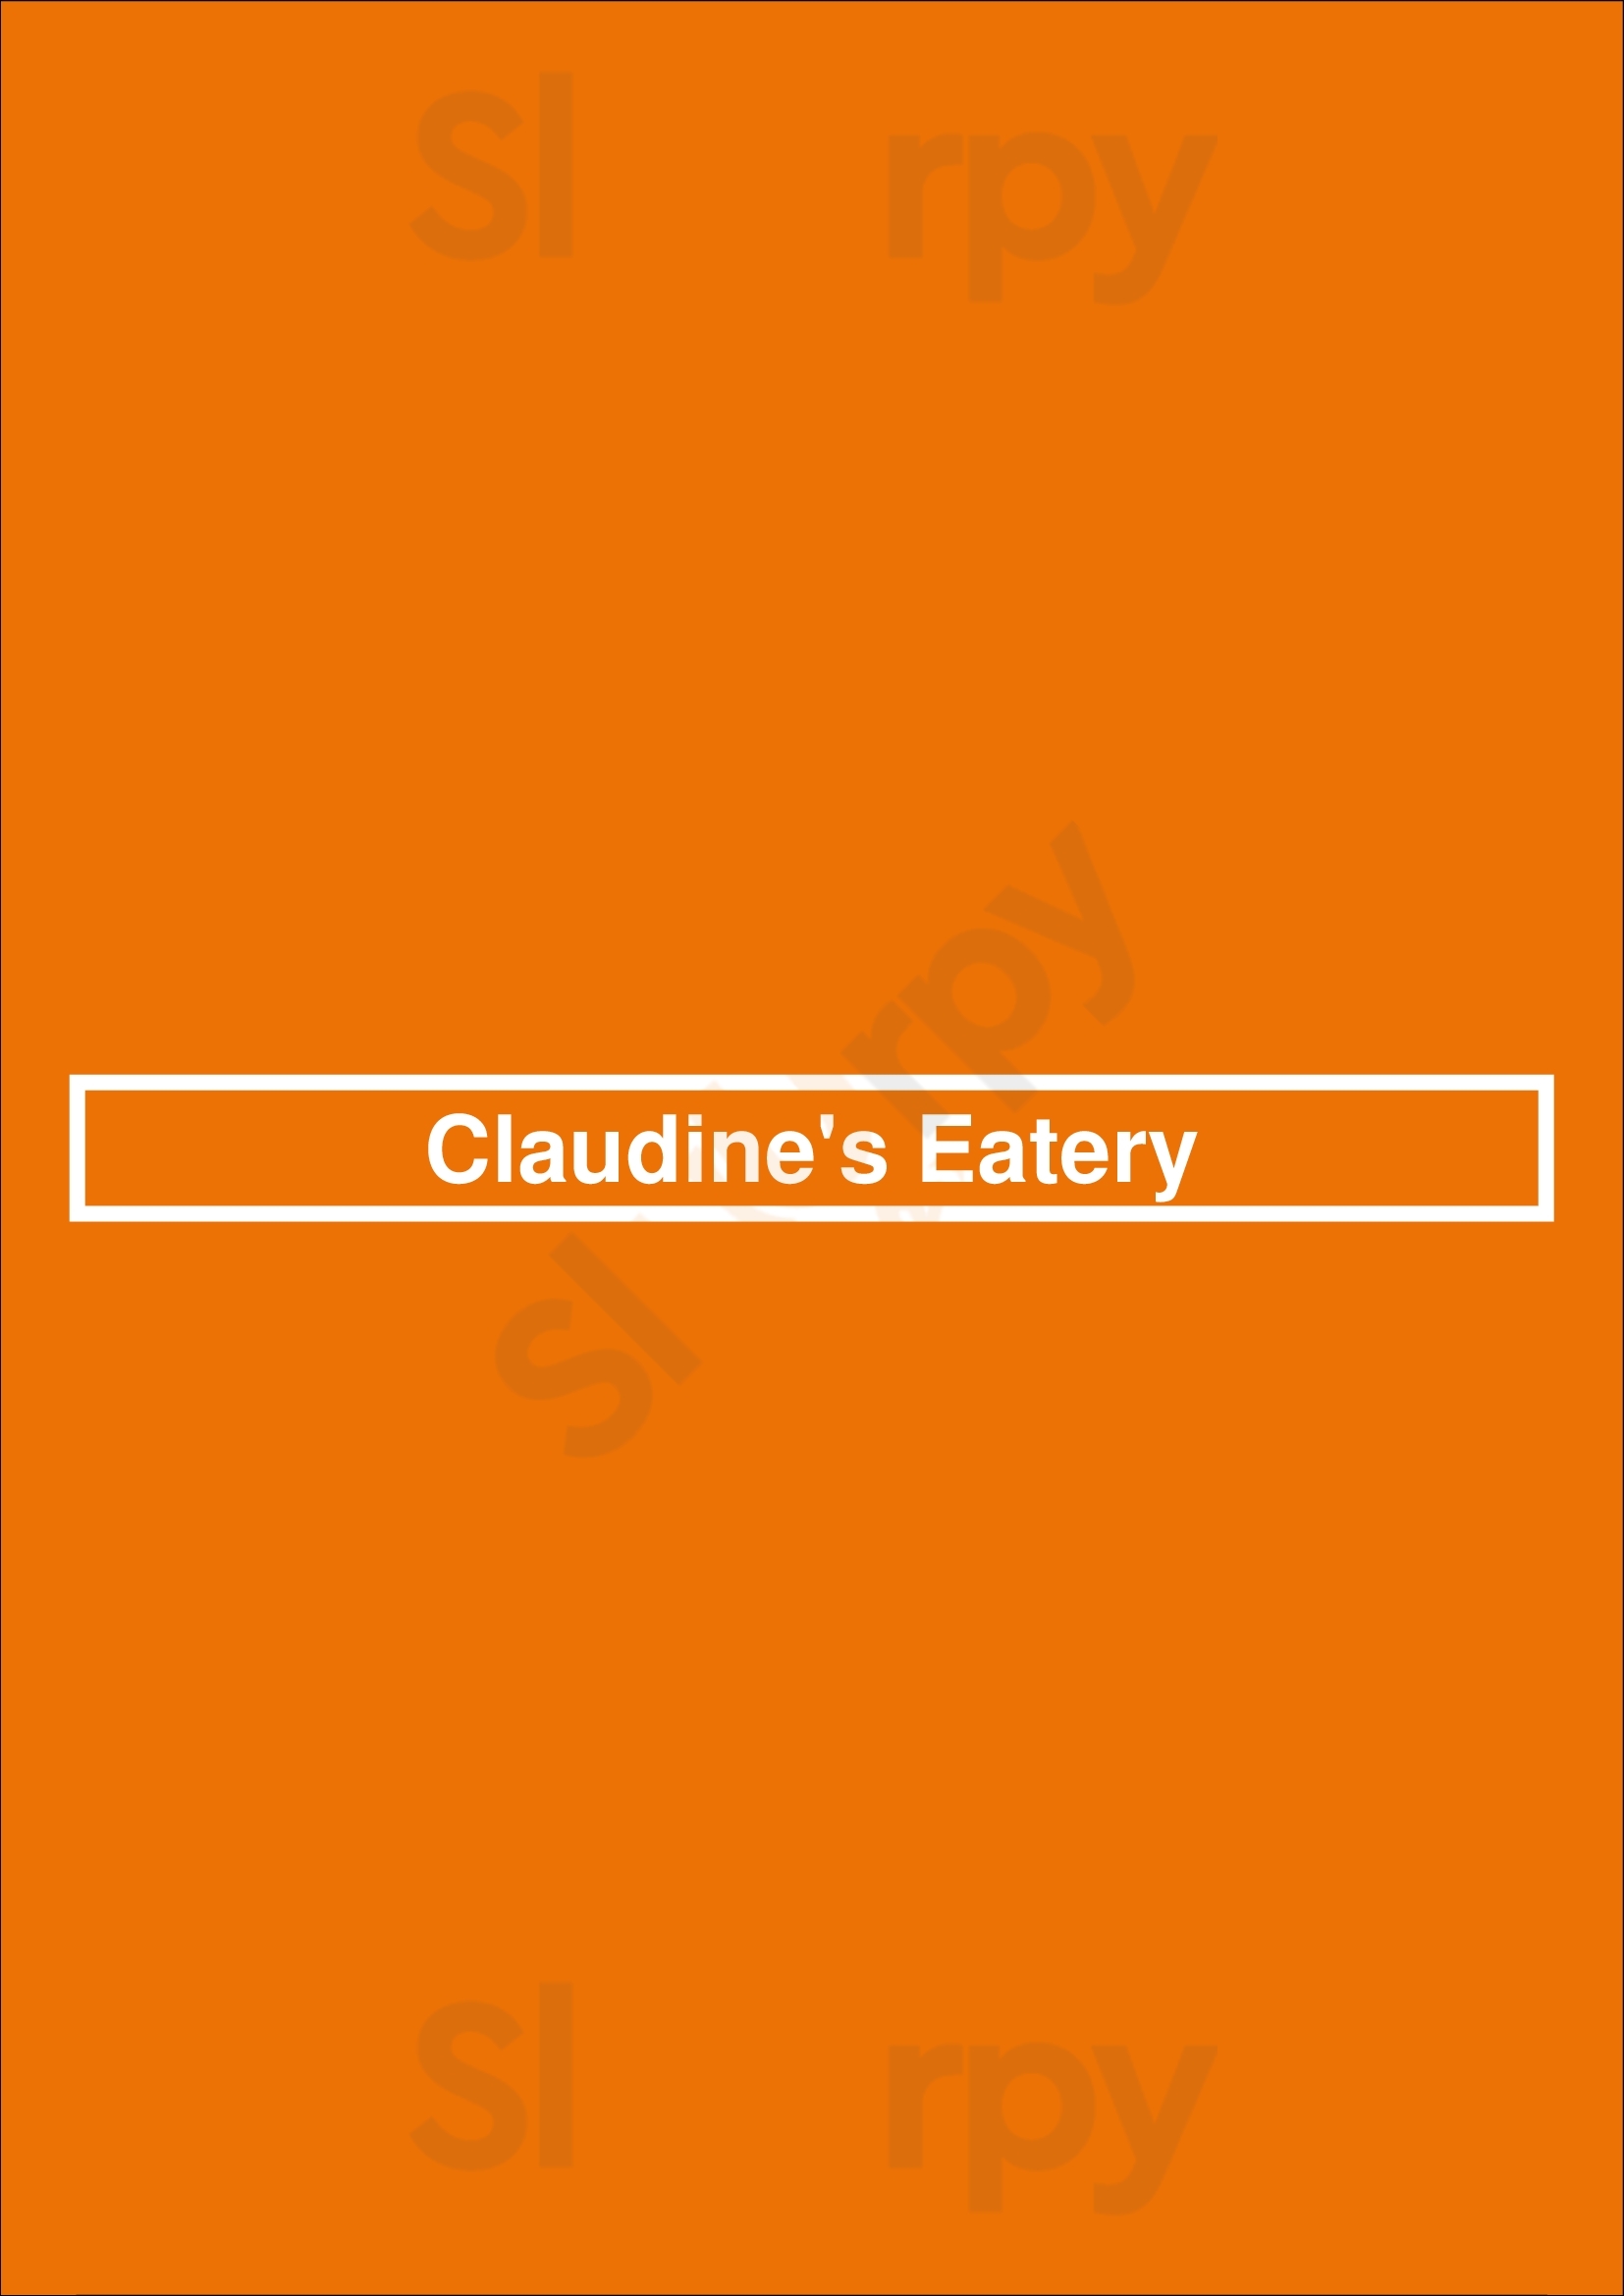 Claudine's Eatery Fredericton Menu - 1